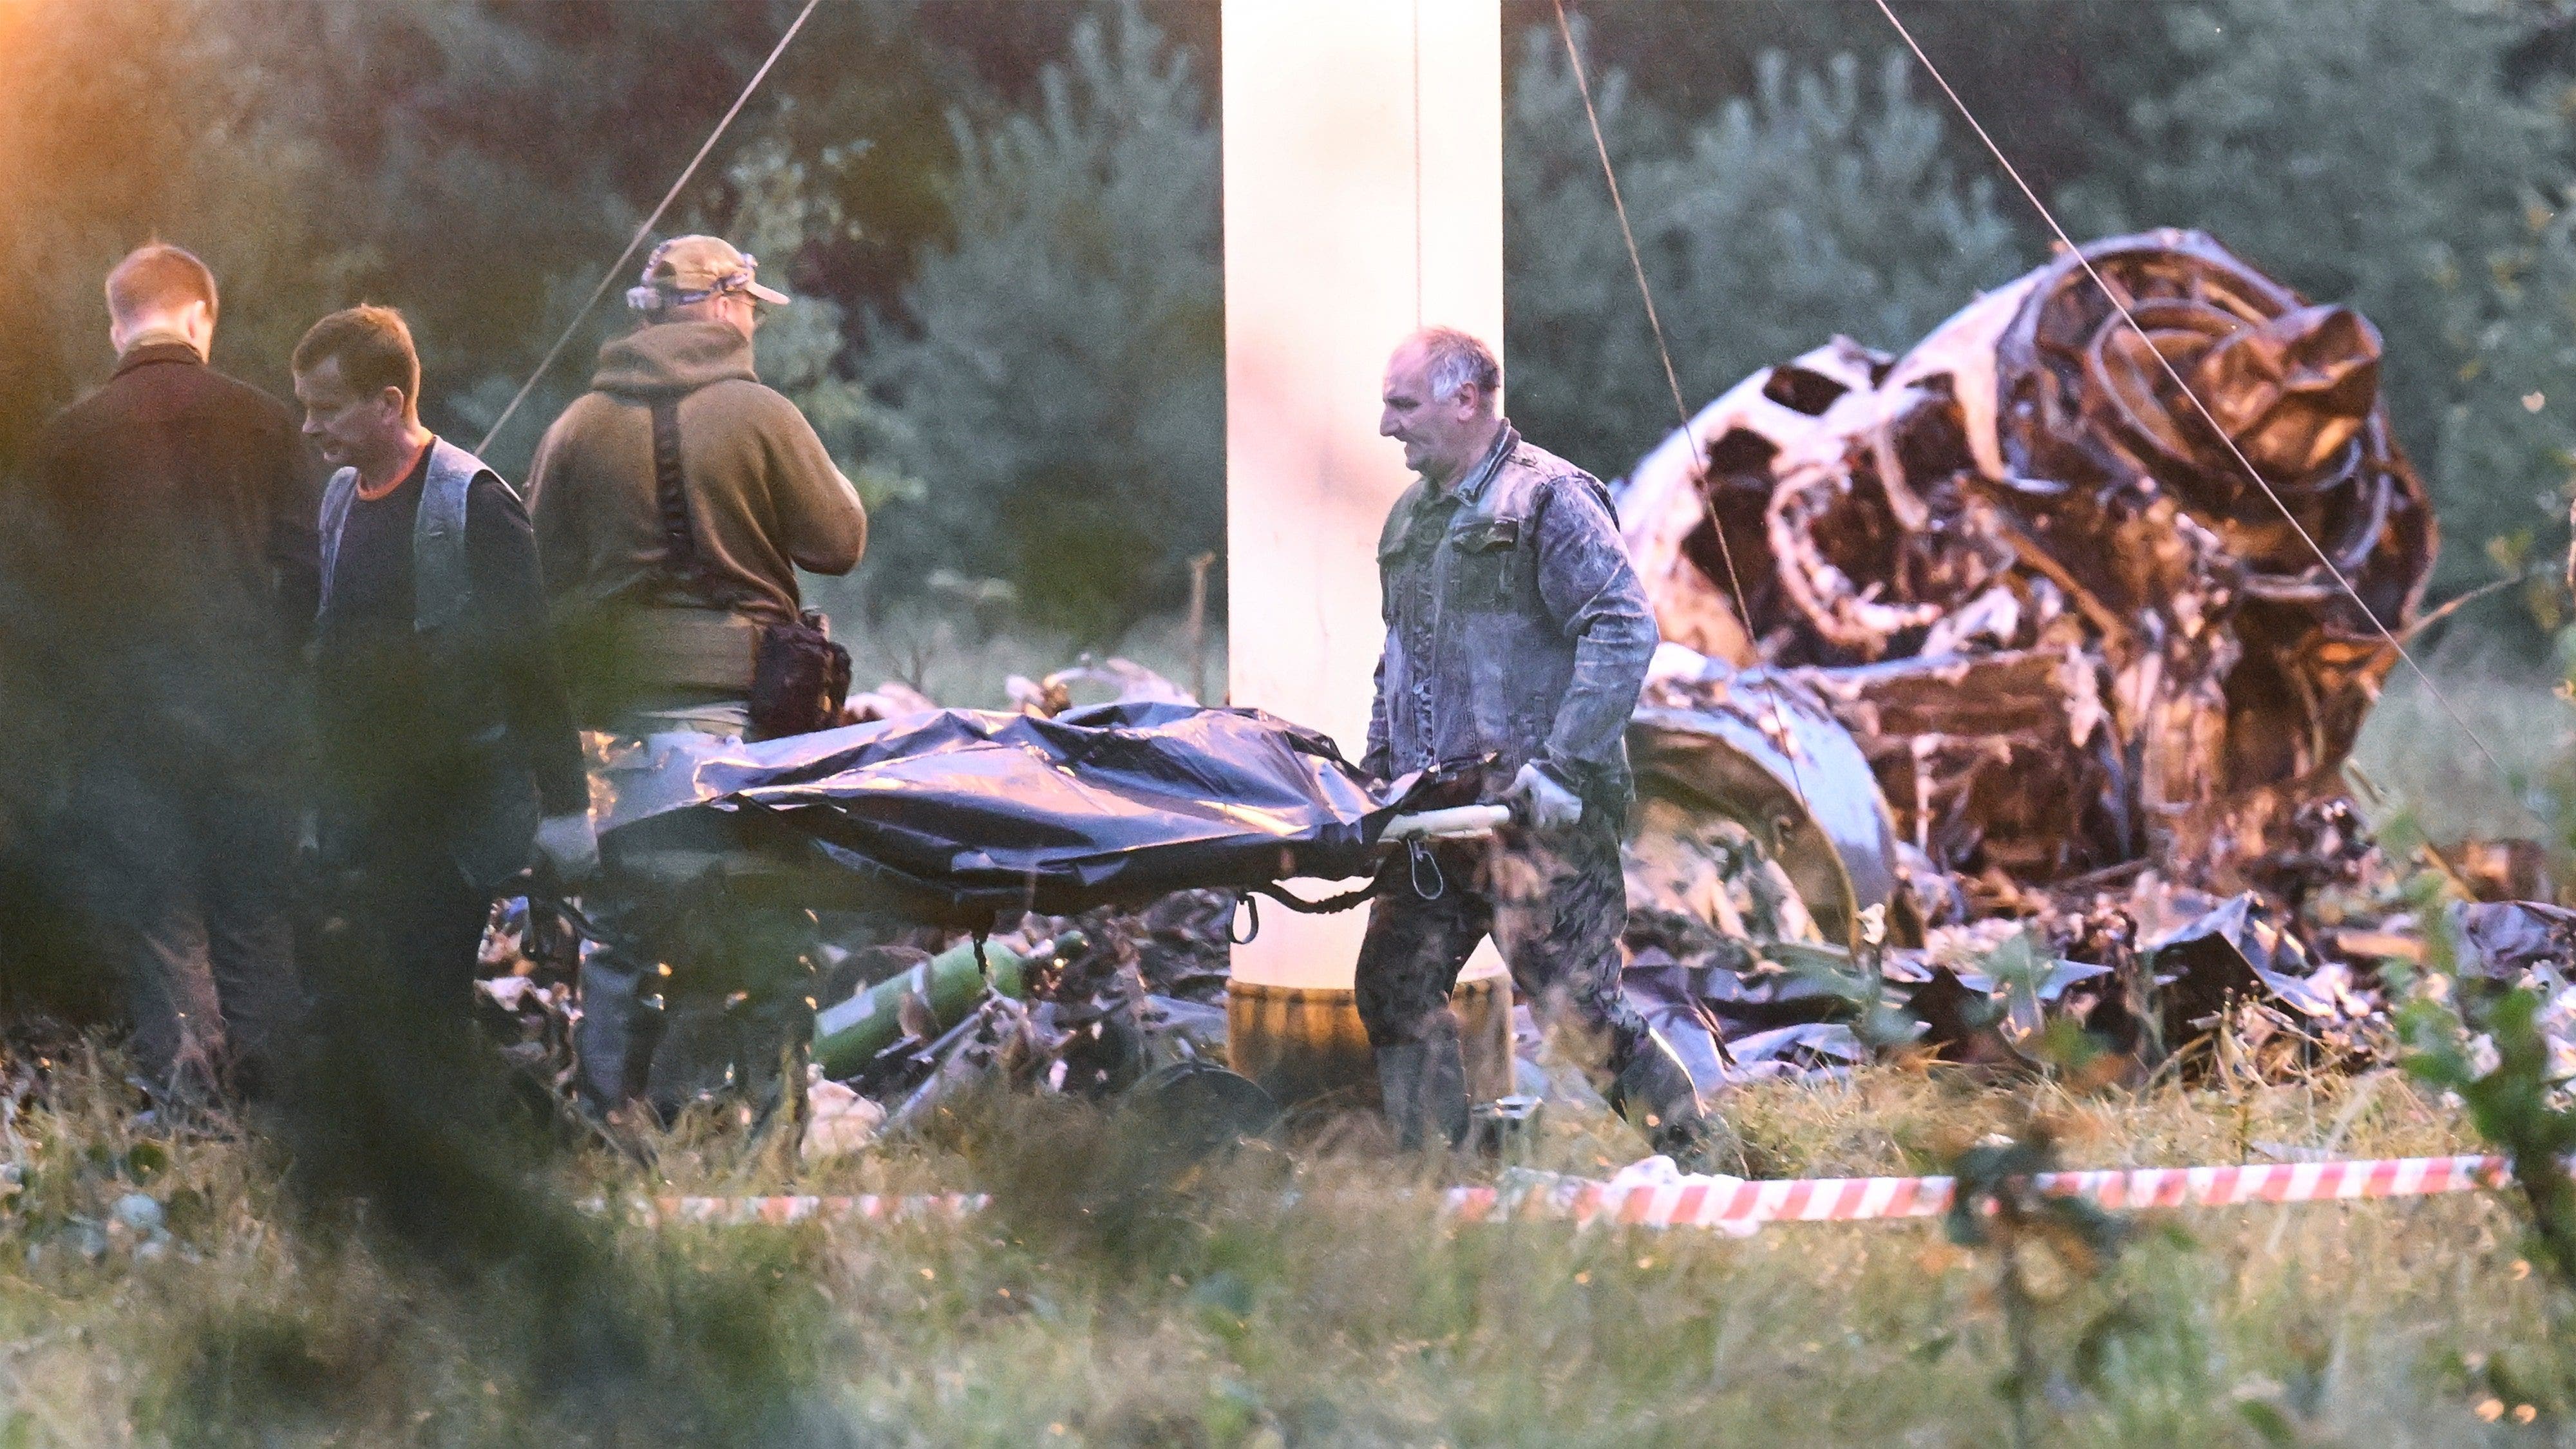 Pentagon says Wagner chief Yevgeny Prigozhin likely killed in plane crash, no evidence of missile attack